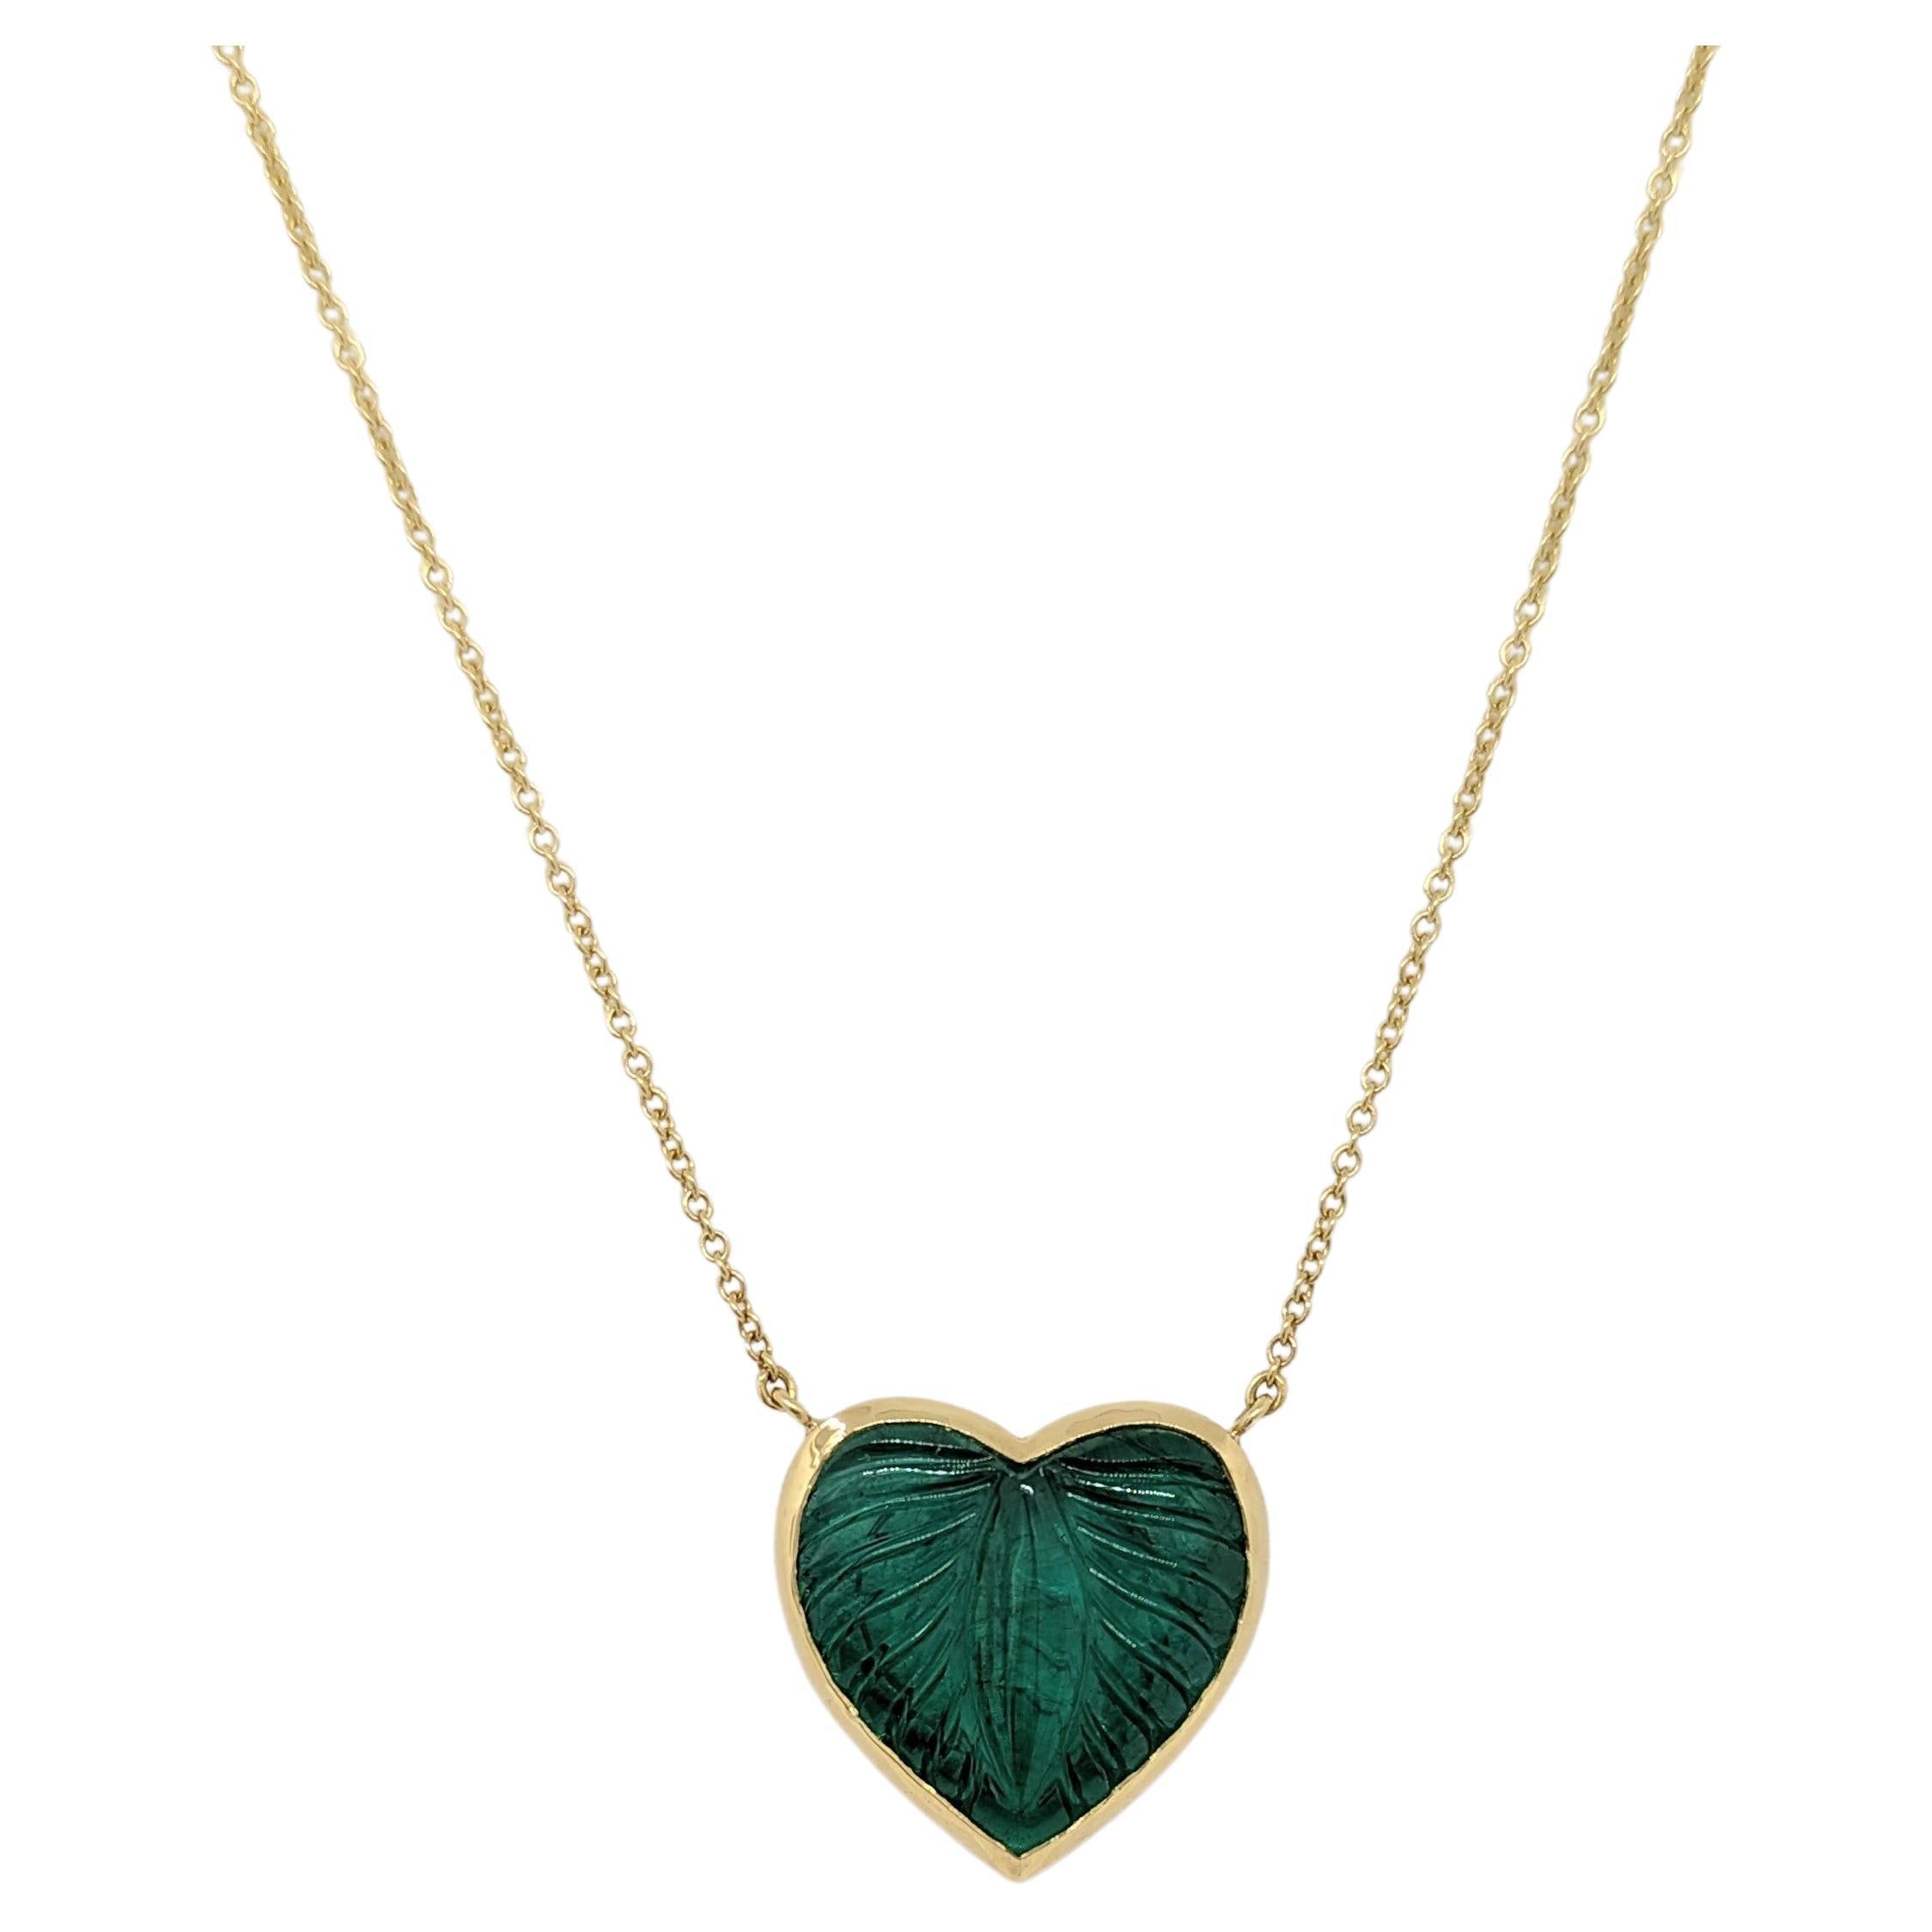 Heart Shape Carved Emerald Pendant Necklace in 18K Yellow Gold